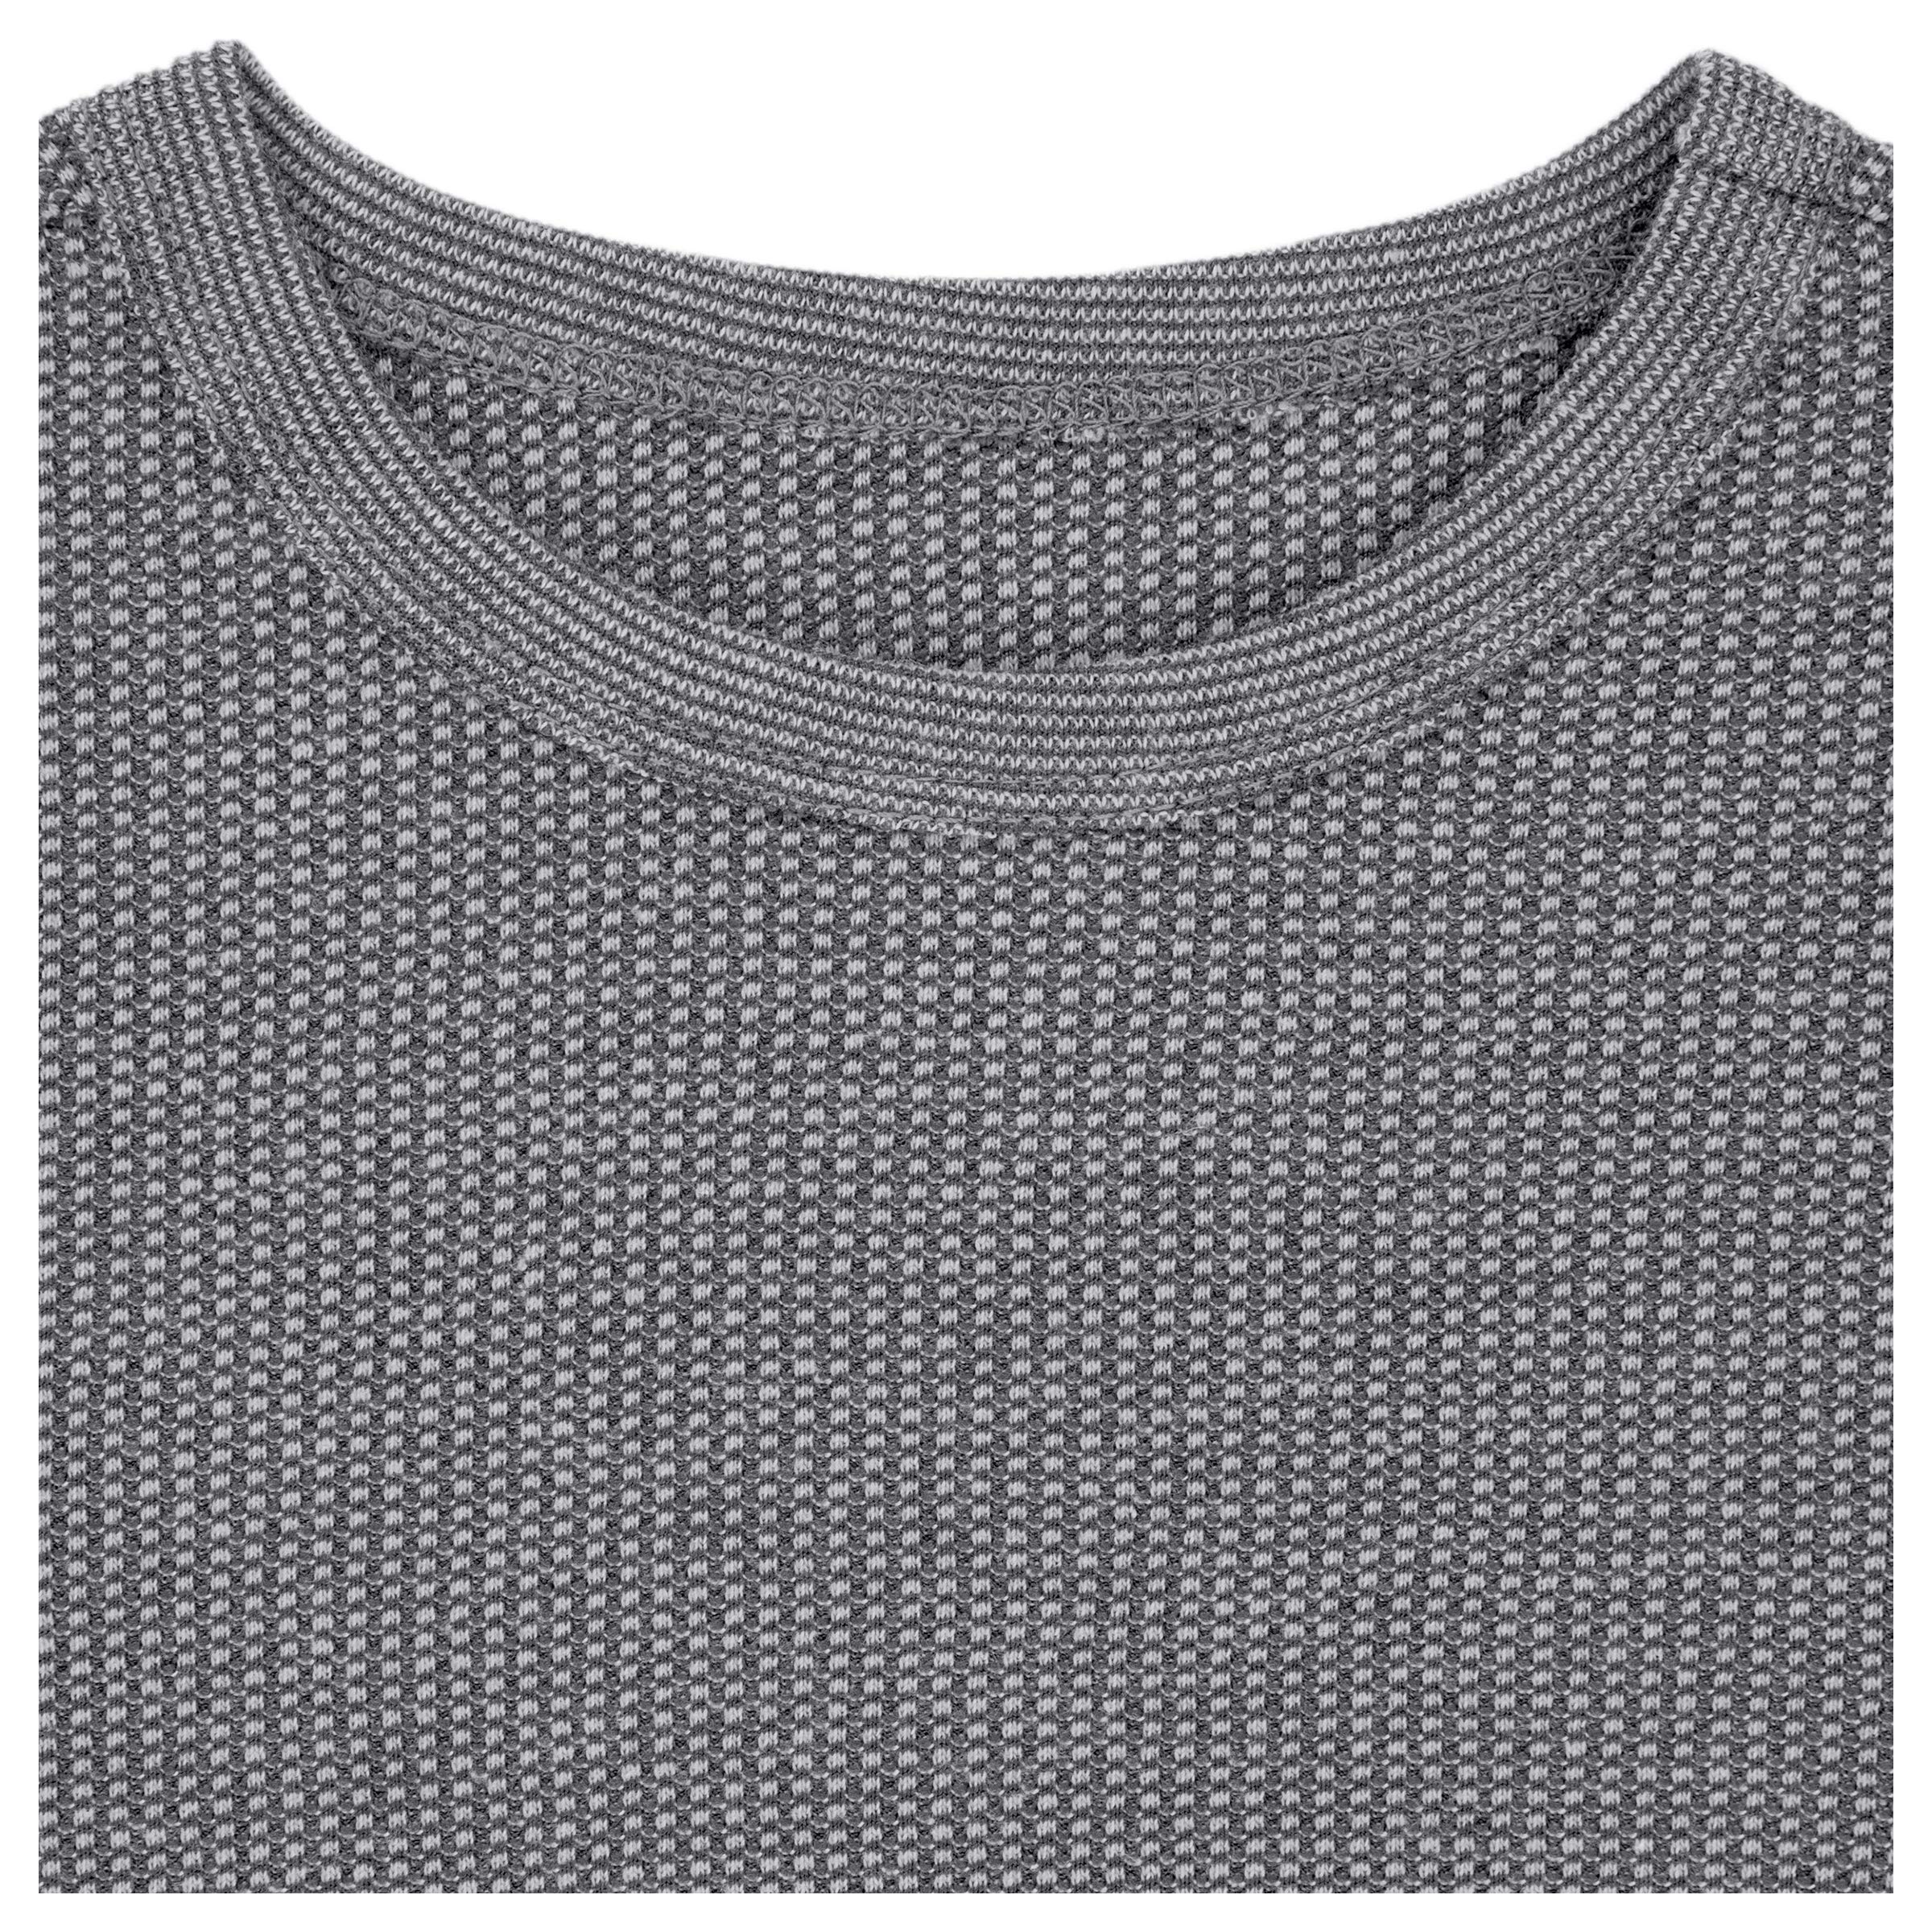 Fruit of the Loom Boys' Premium 2-Pack Thermal Waffle Crew Top